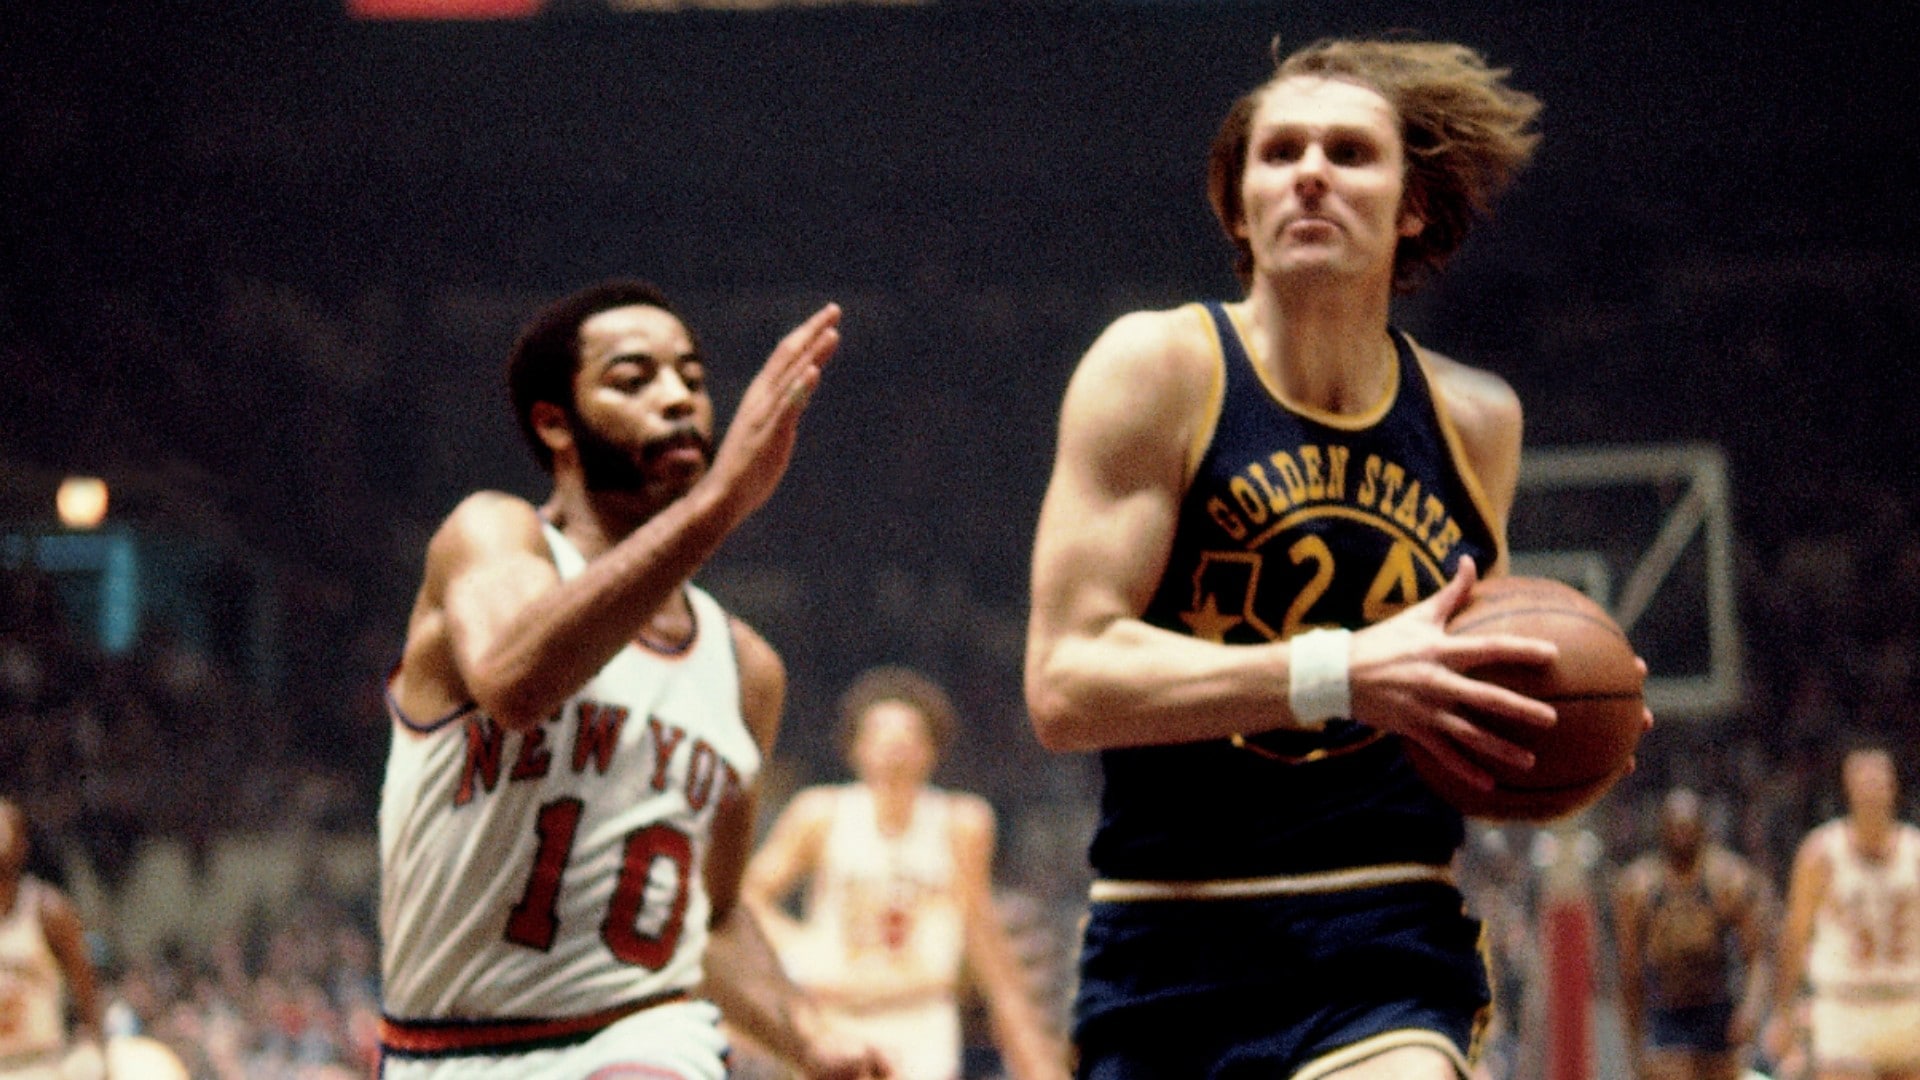 NBA News: "No such thing as GOAT" - Rick Barry dismissed Larry Bird-Magic Johnson debate with sensible logic